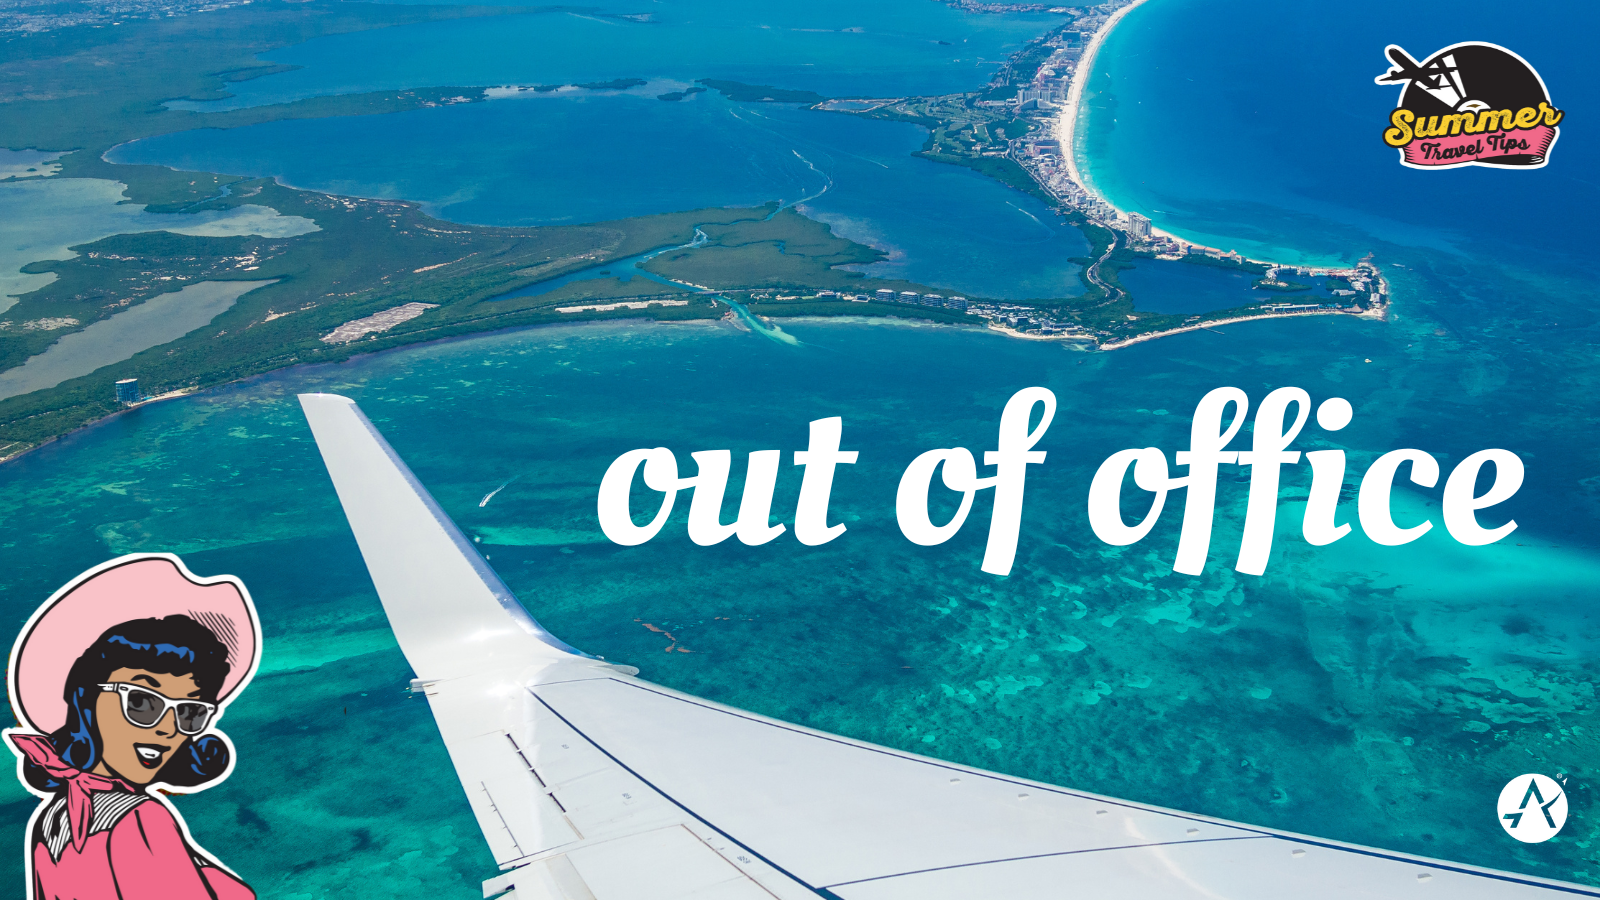 a photo of an airplane wing and ocean in the background with text that reads "out of office"